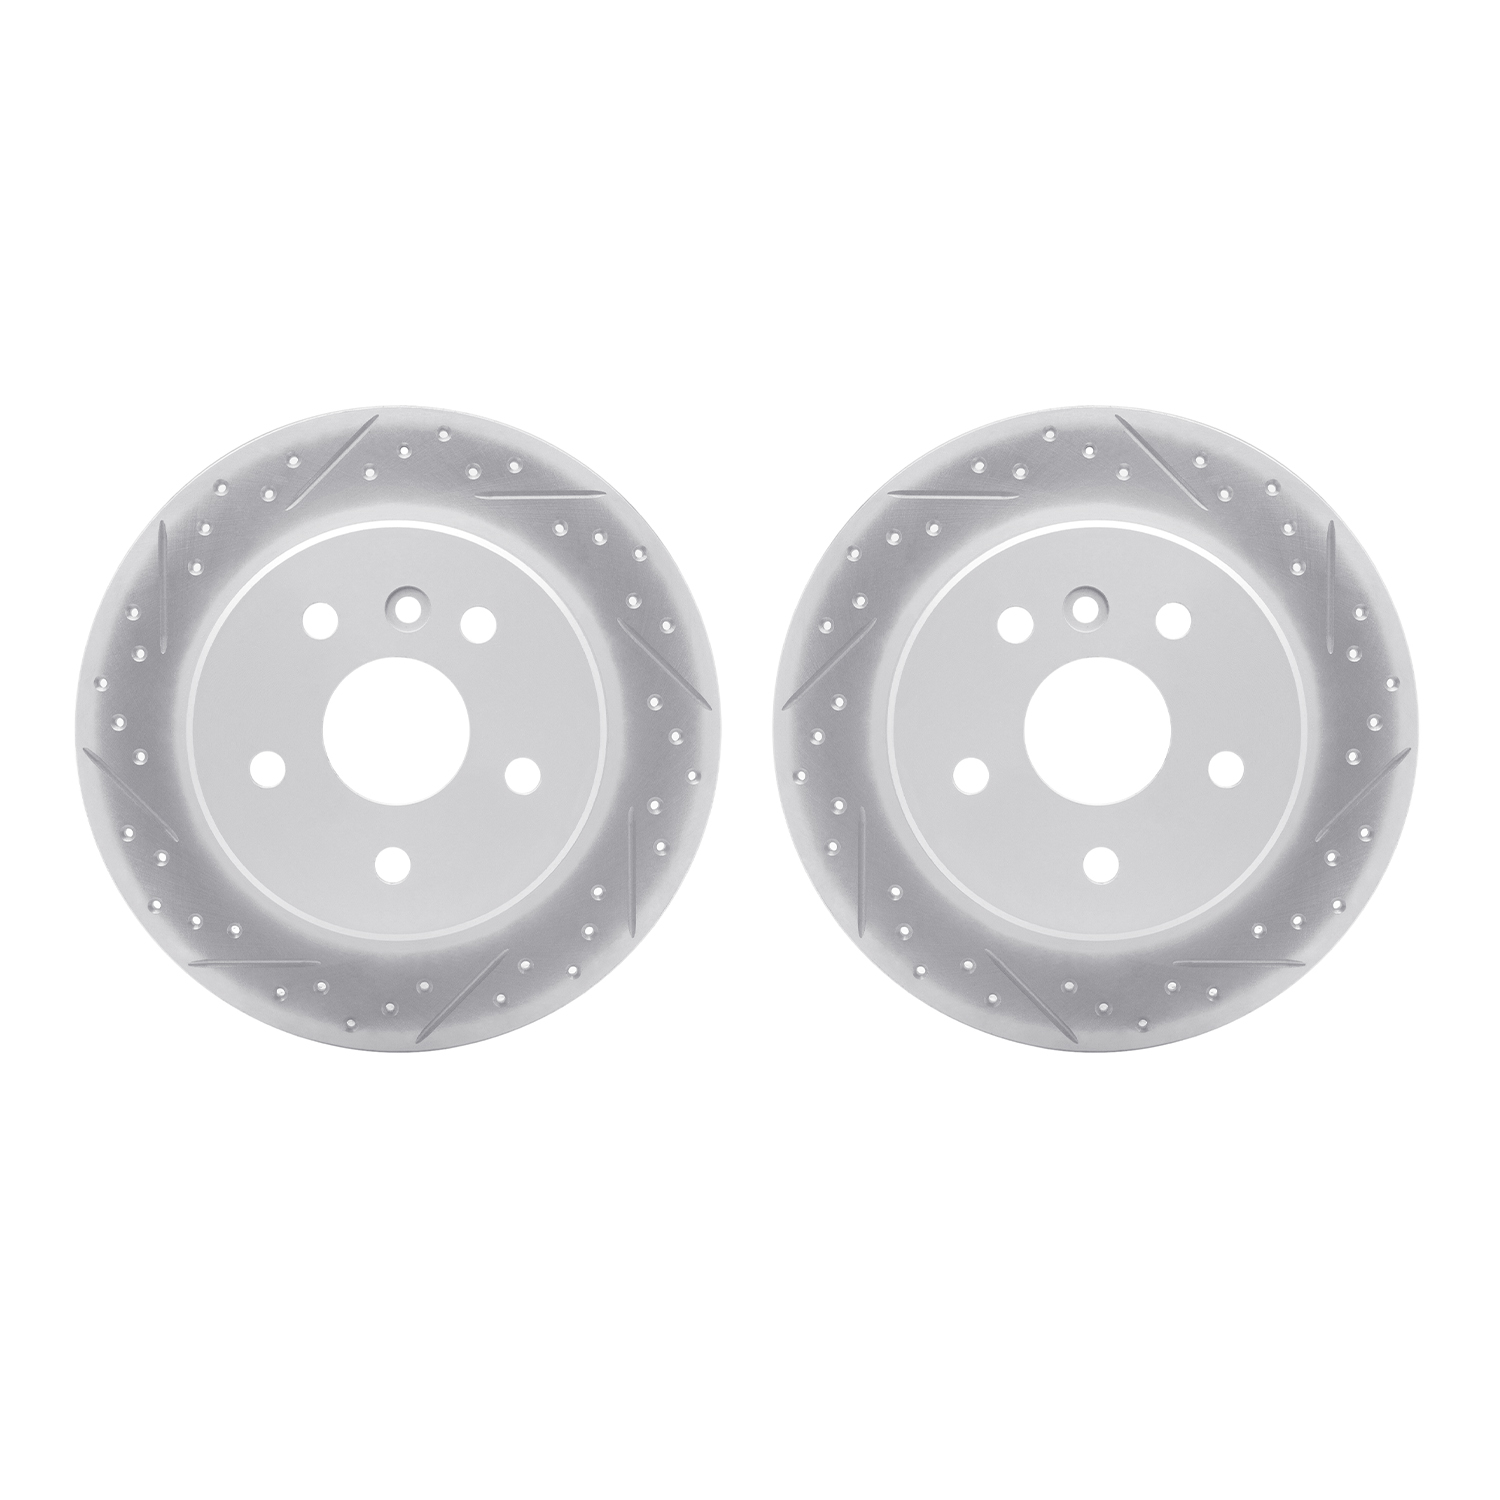 2002-76057 Geoperformance Drilled/Slotted Brake Rotors, 2000-2004 Lexus/Toyota/Scion, Position: Rear